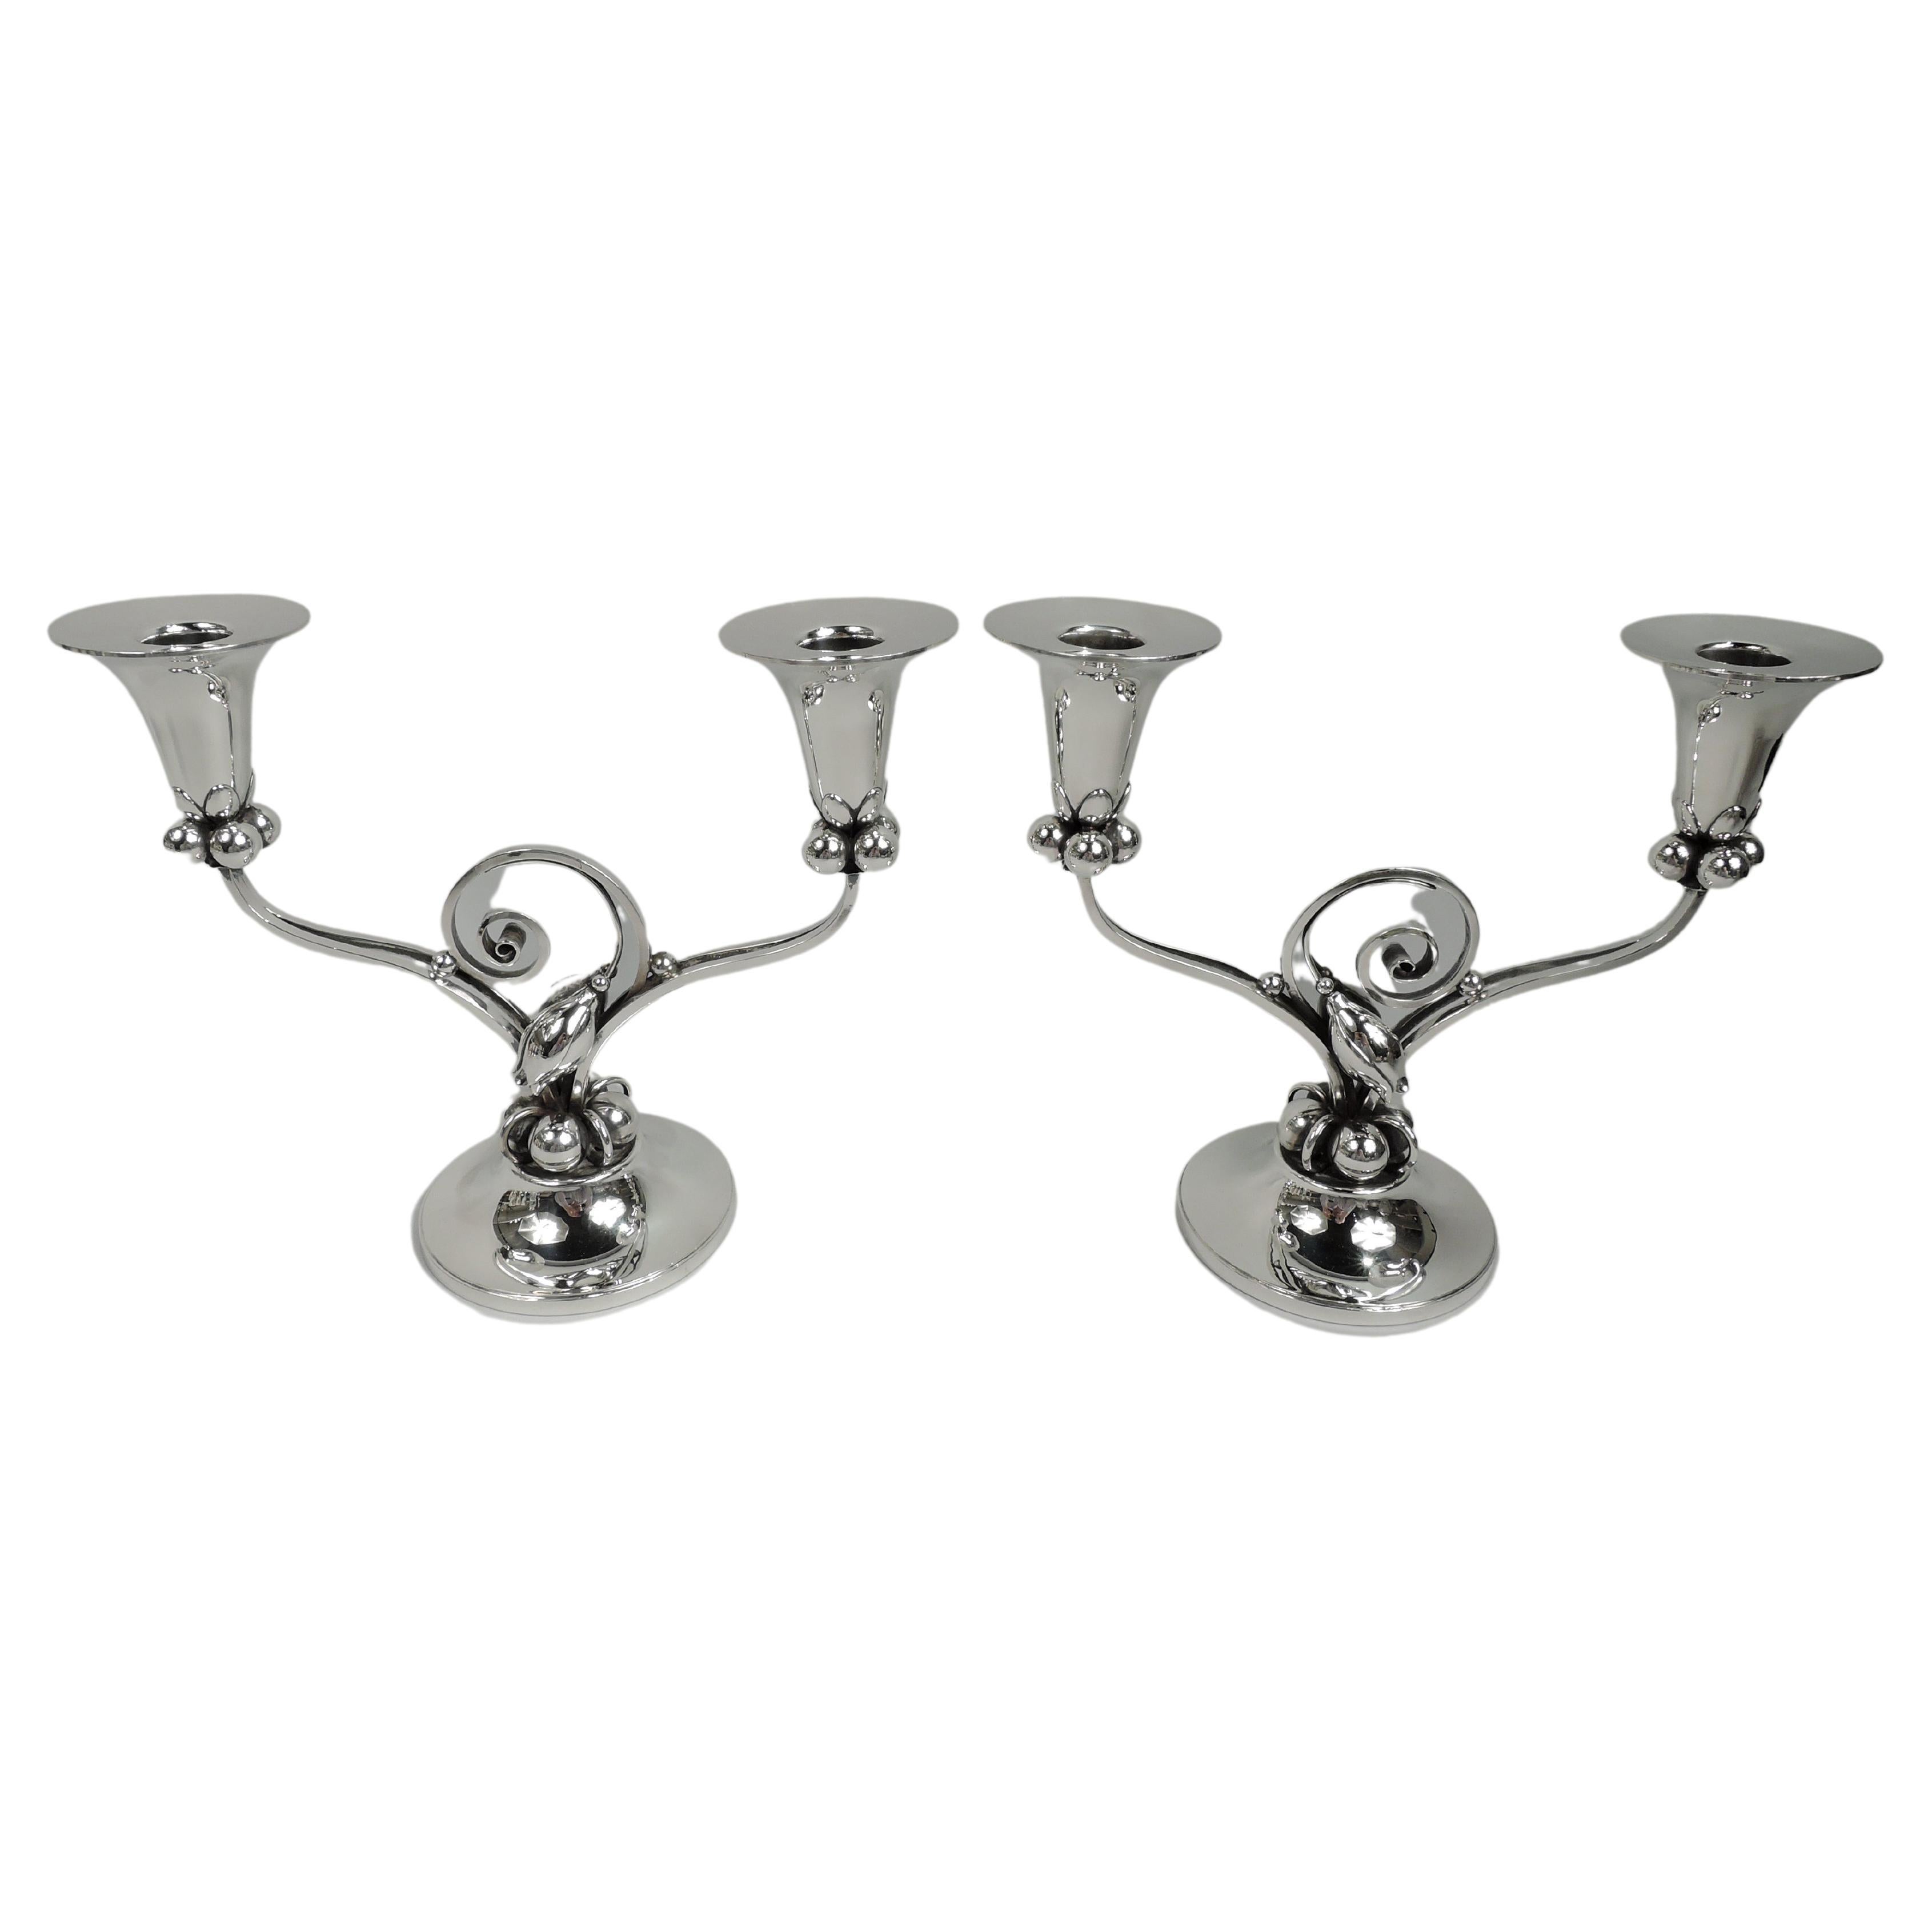 Pair of La Paglia for International Mid-Century Modern Candelabra For Sale